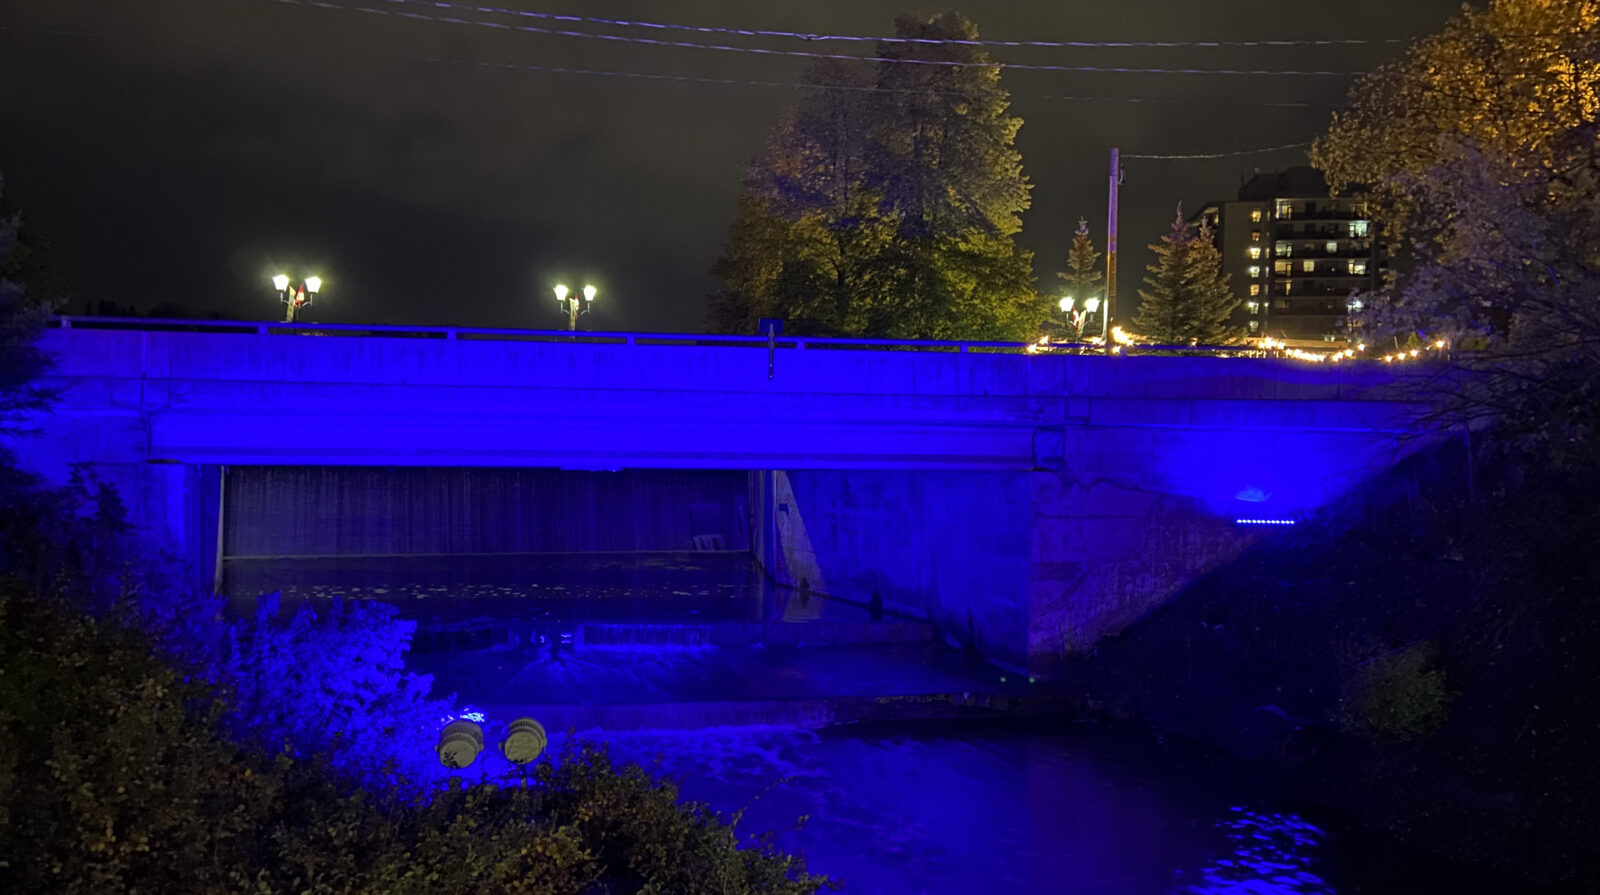 The Fred A. Lundy Bridge in Newmarket, Ontario glows blue from the light of blue spotlights at the creek edge in the foreground.